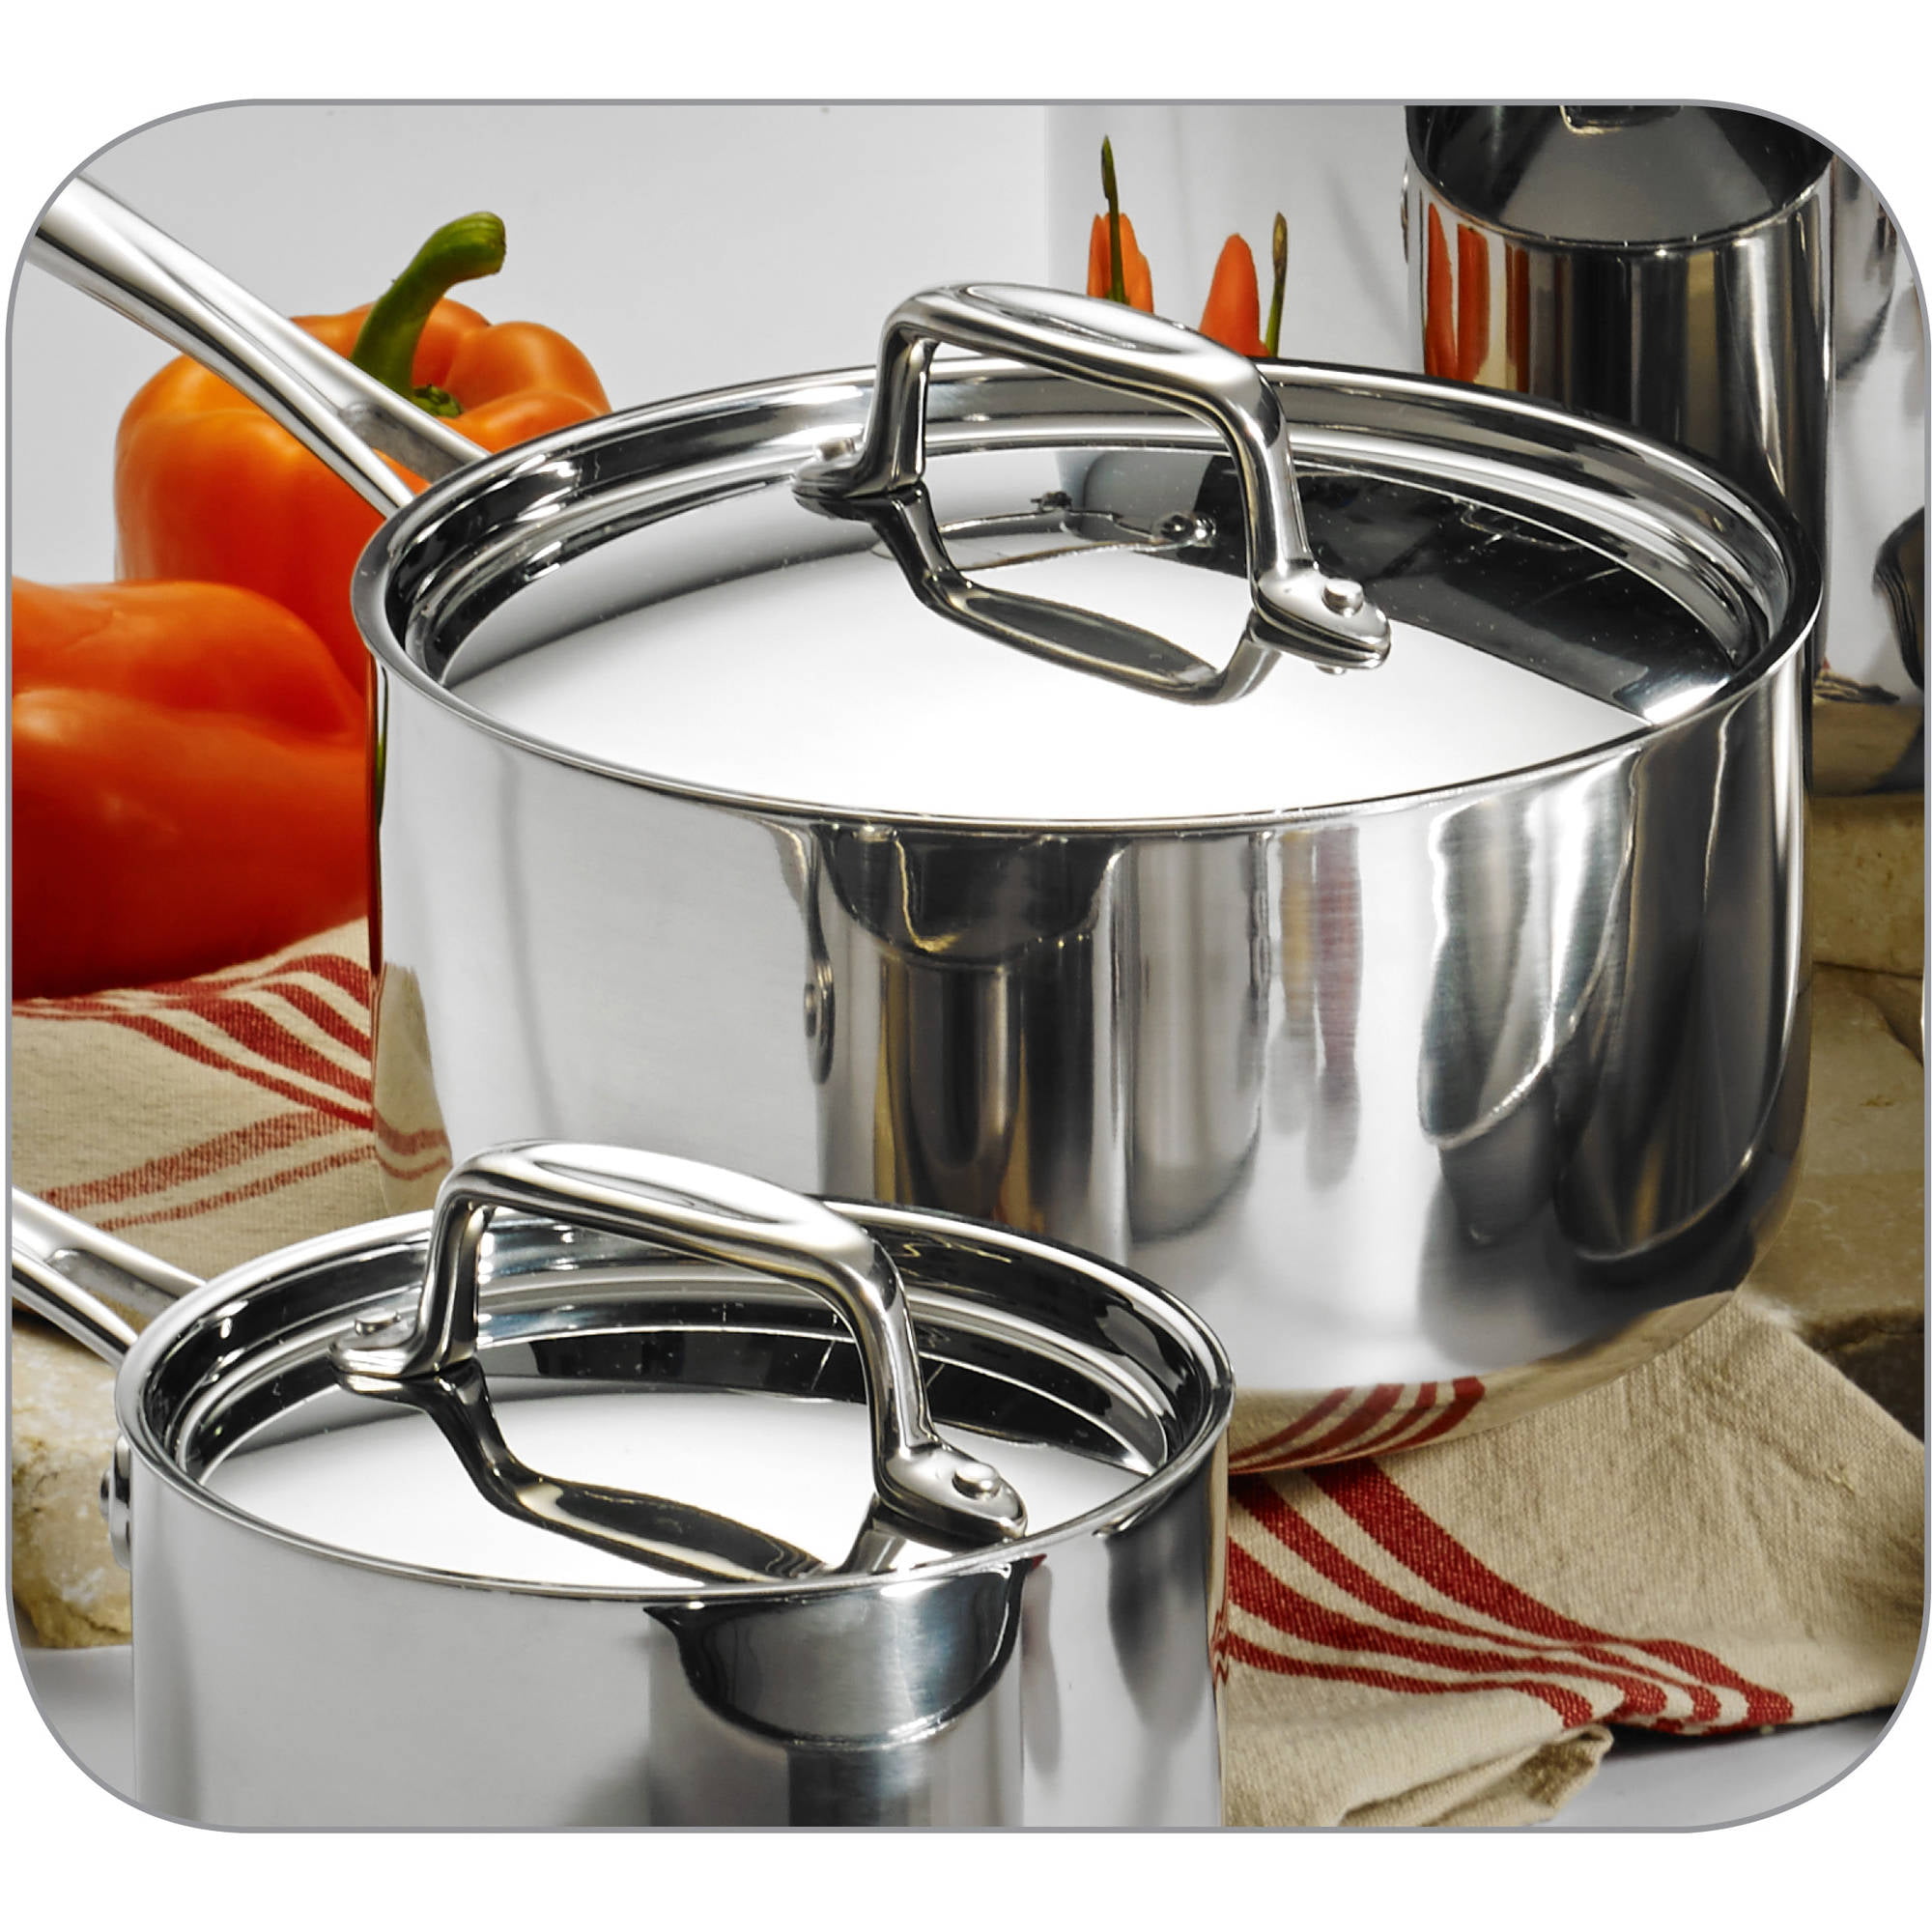 Tramontina 10-piece Tri-ply Clad Cookware Set, Stainless Steel | eBay Tri Ply Clad Stainless Steel Cookware